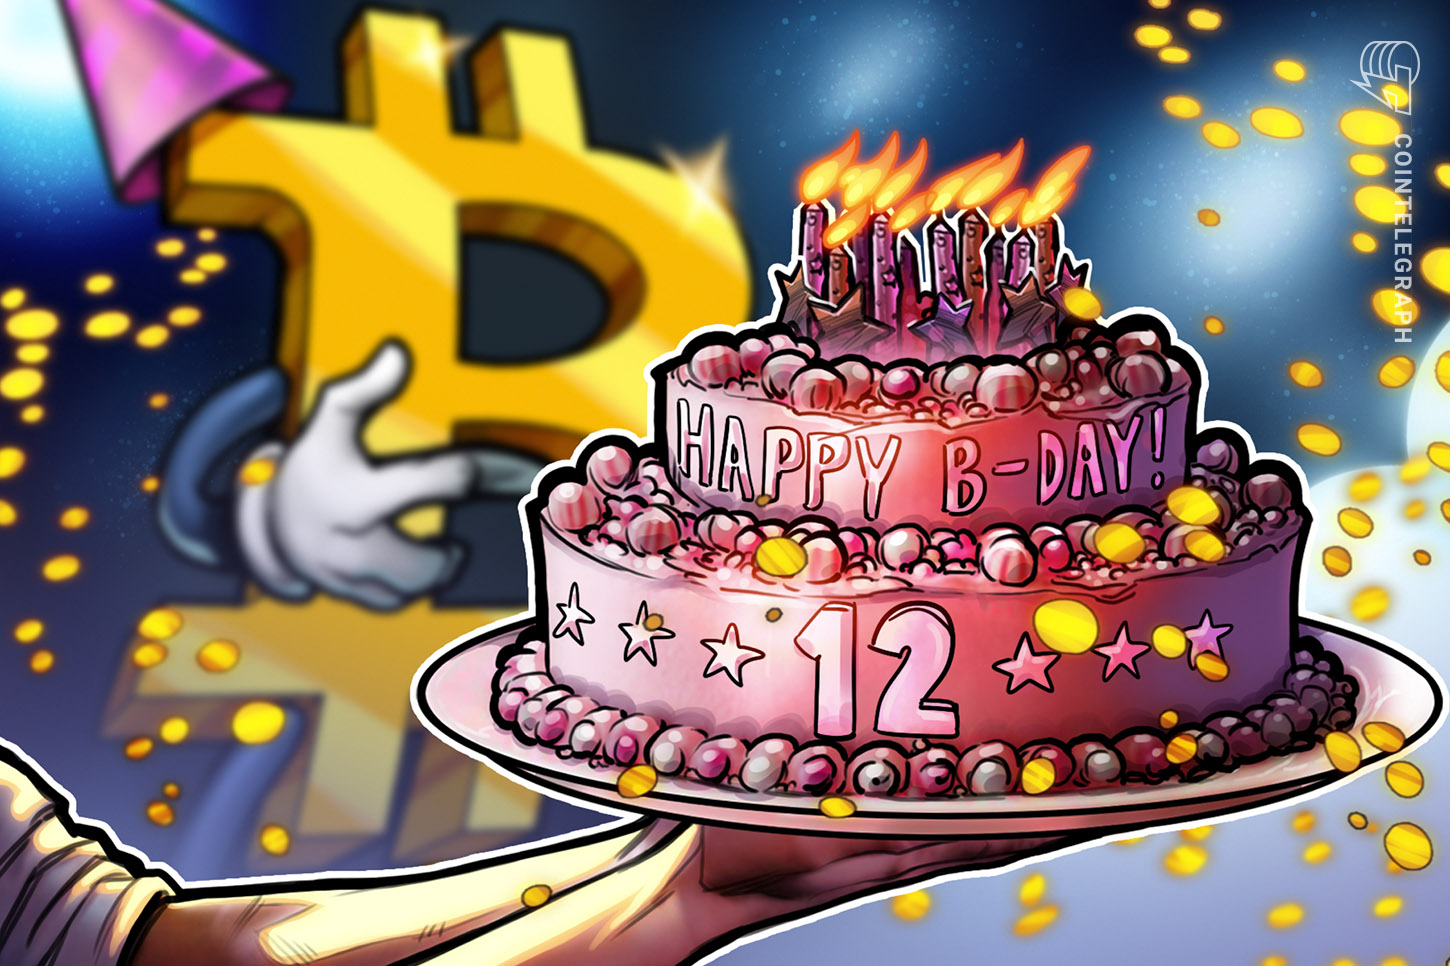 What business leaders would need for Bitcoin’s white paper 12th anniversary